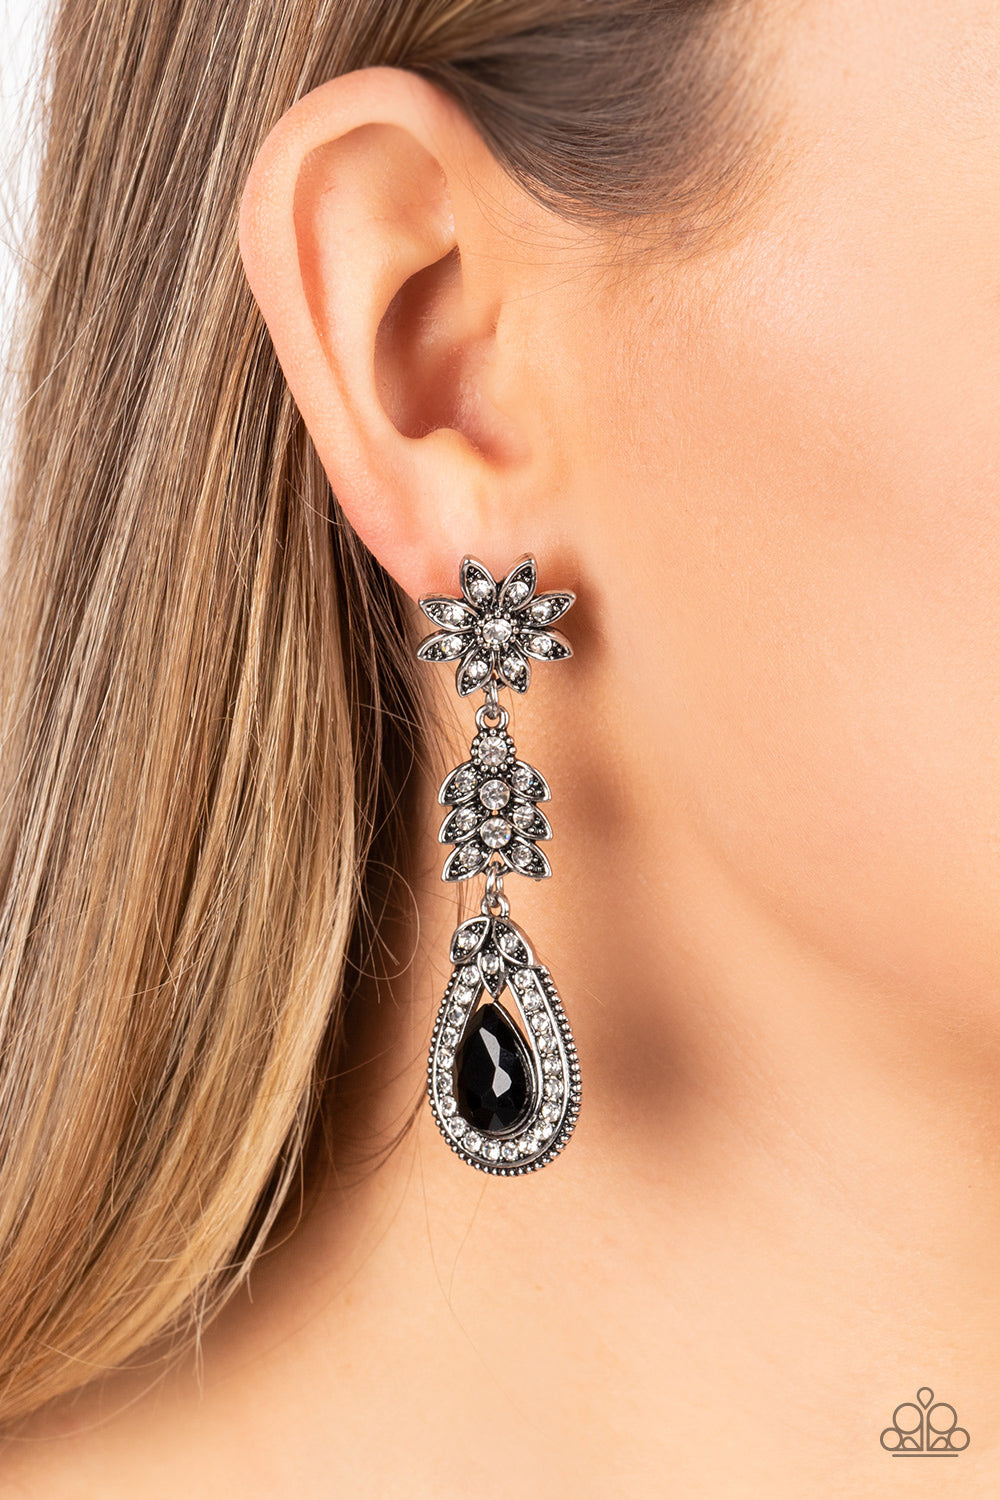 Floral Fantasy - Black Post Earrings - Paparazzi Accessories